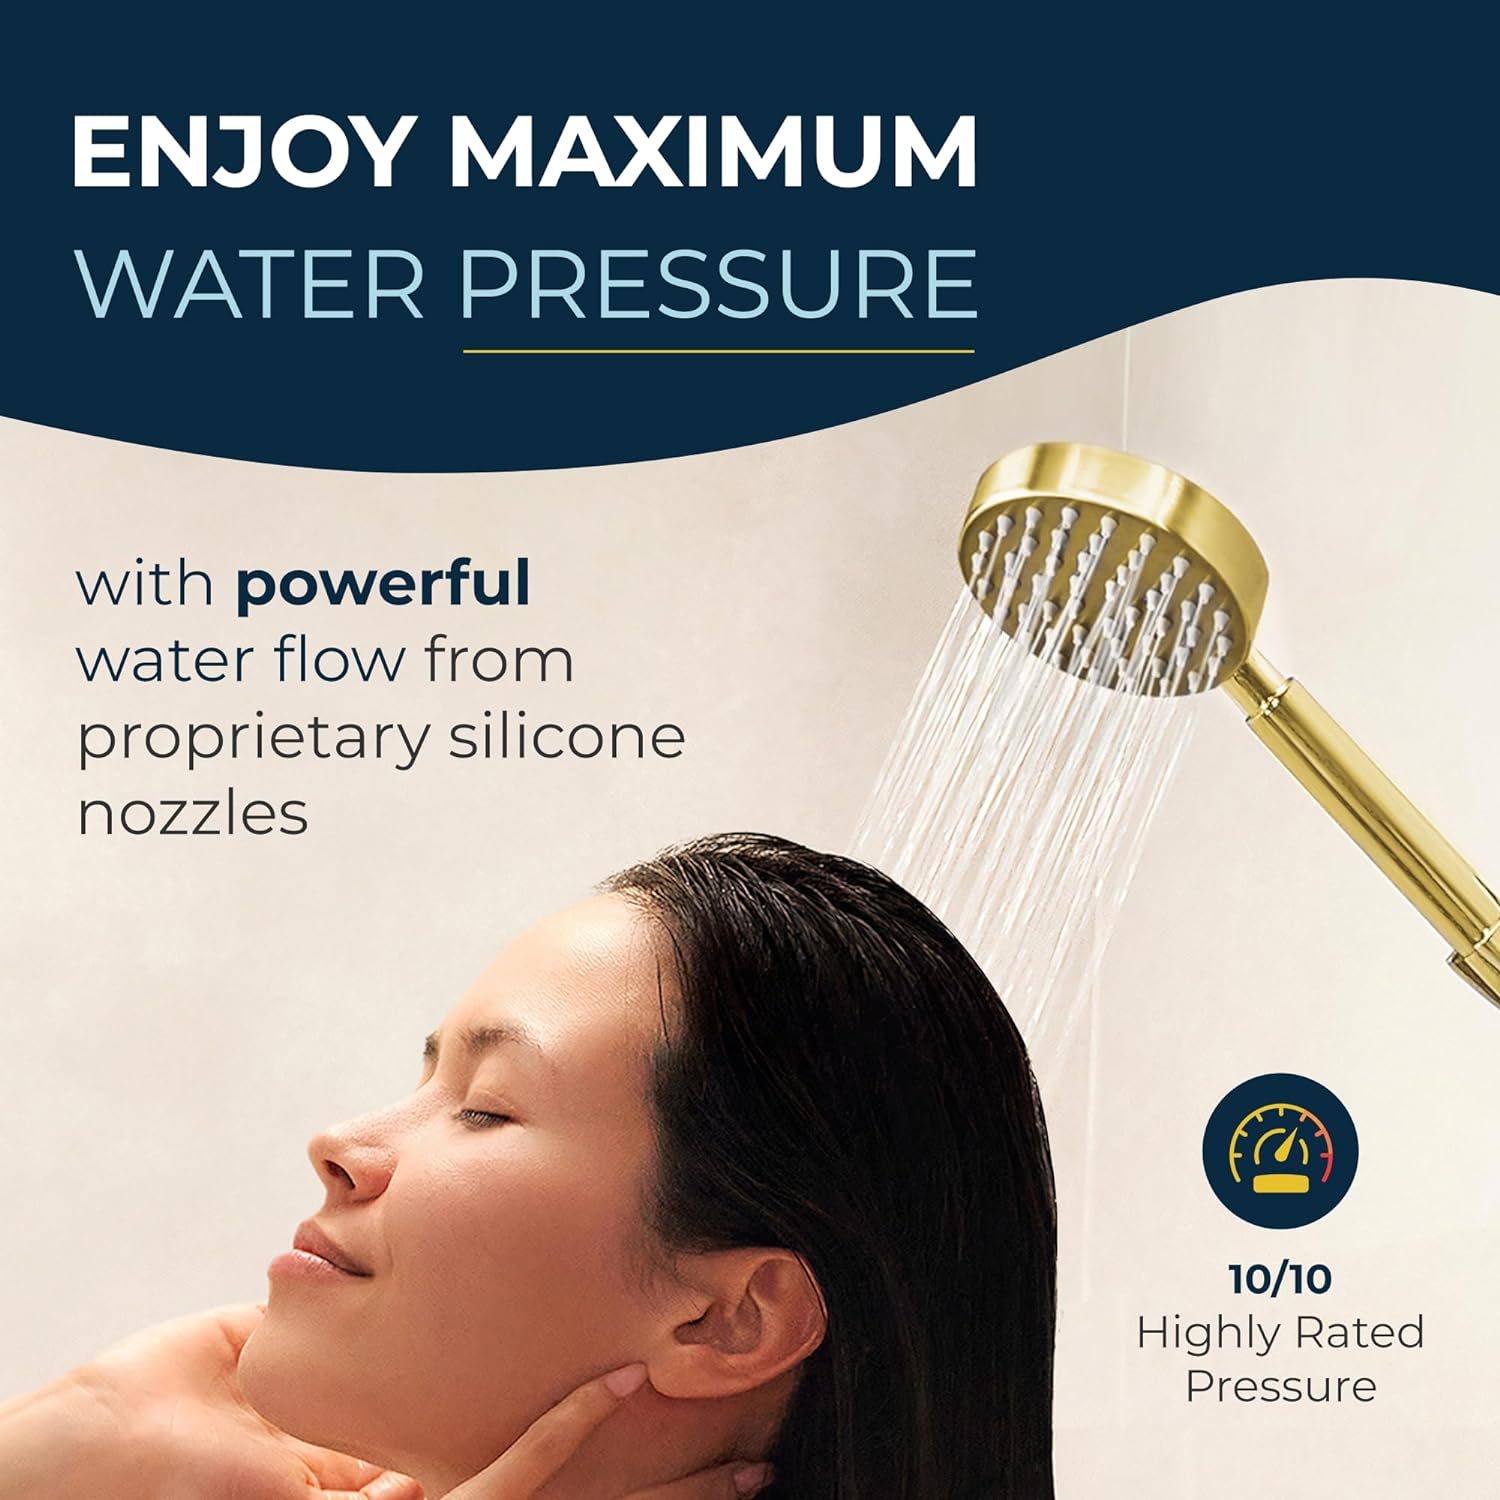 ALL METAL Handheld Shower Head with Hose and Brass Holder- CHROME - 2.5 GPM High Pressure Shower Heads - Hand Shower Head with Adjustable Shower Wand Bracket - 6ft Flexible Extension